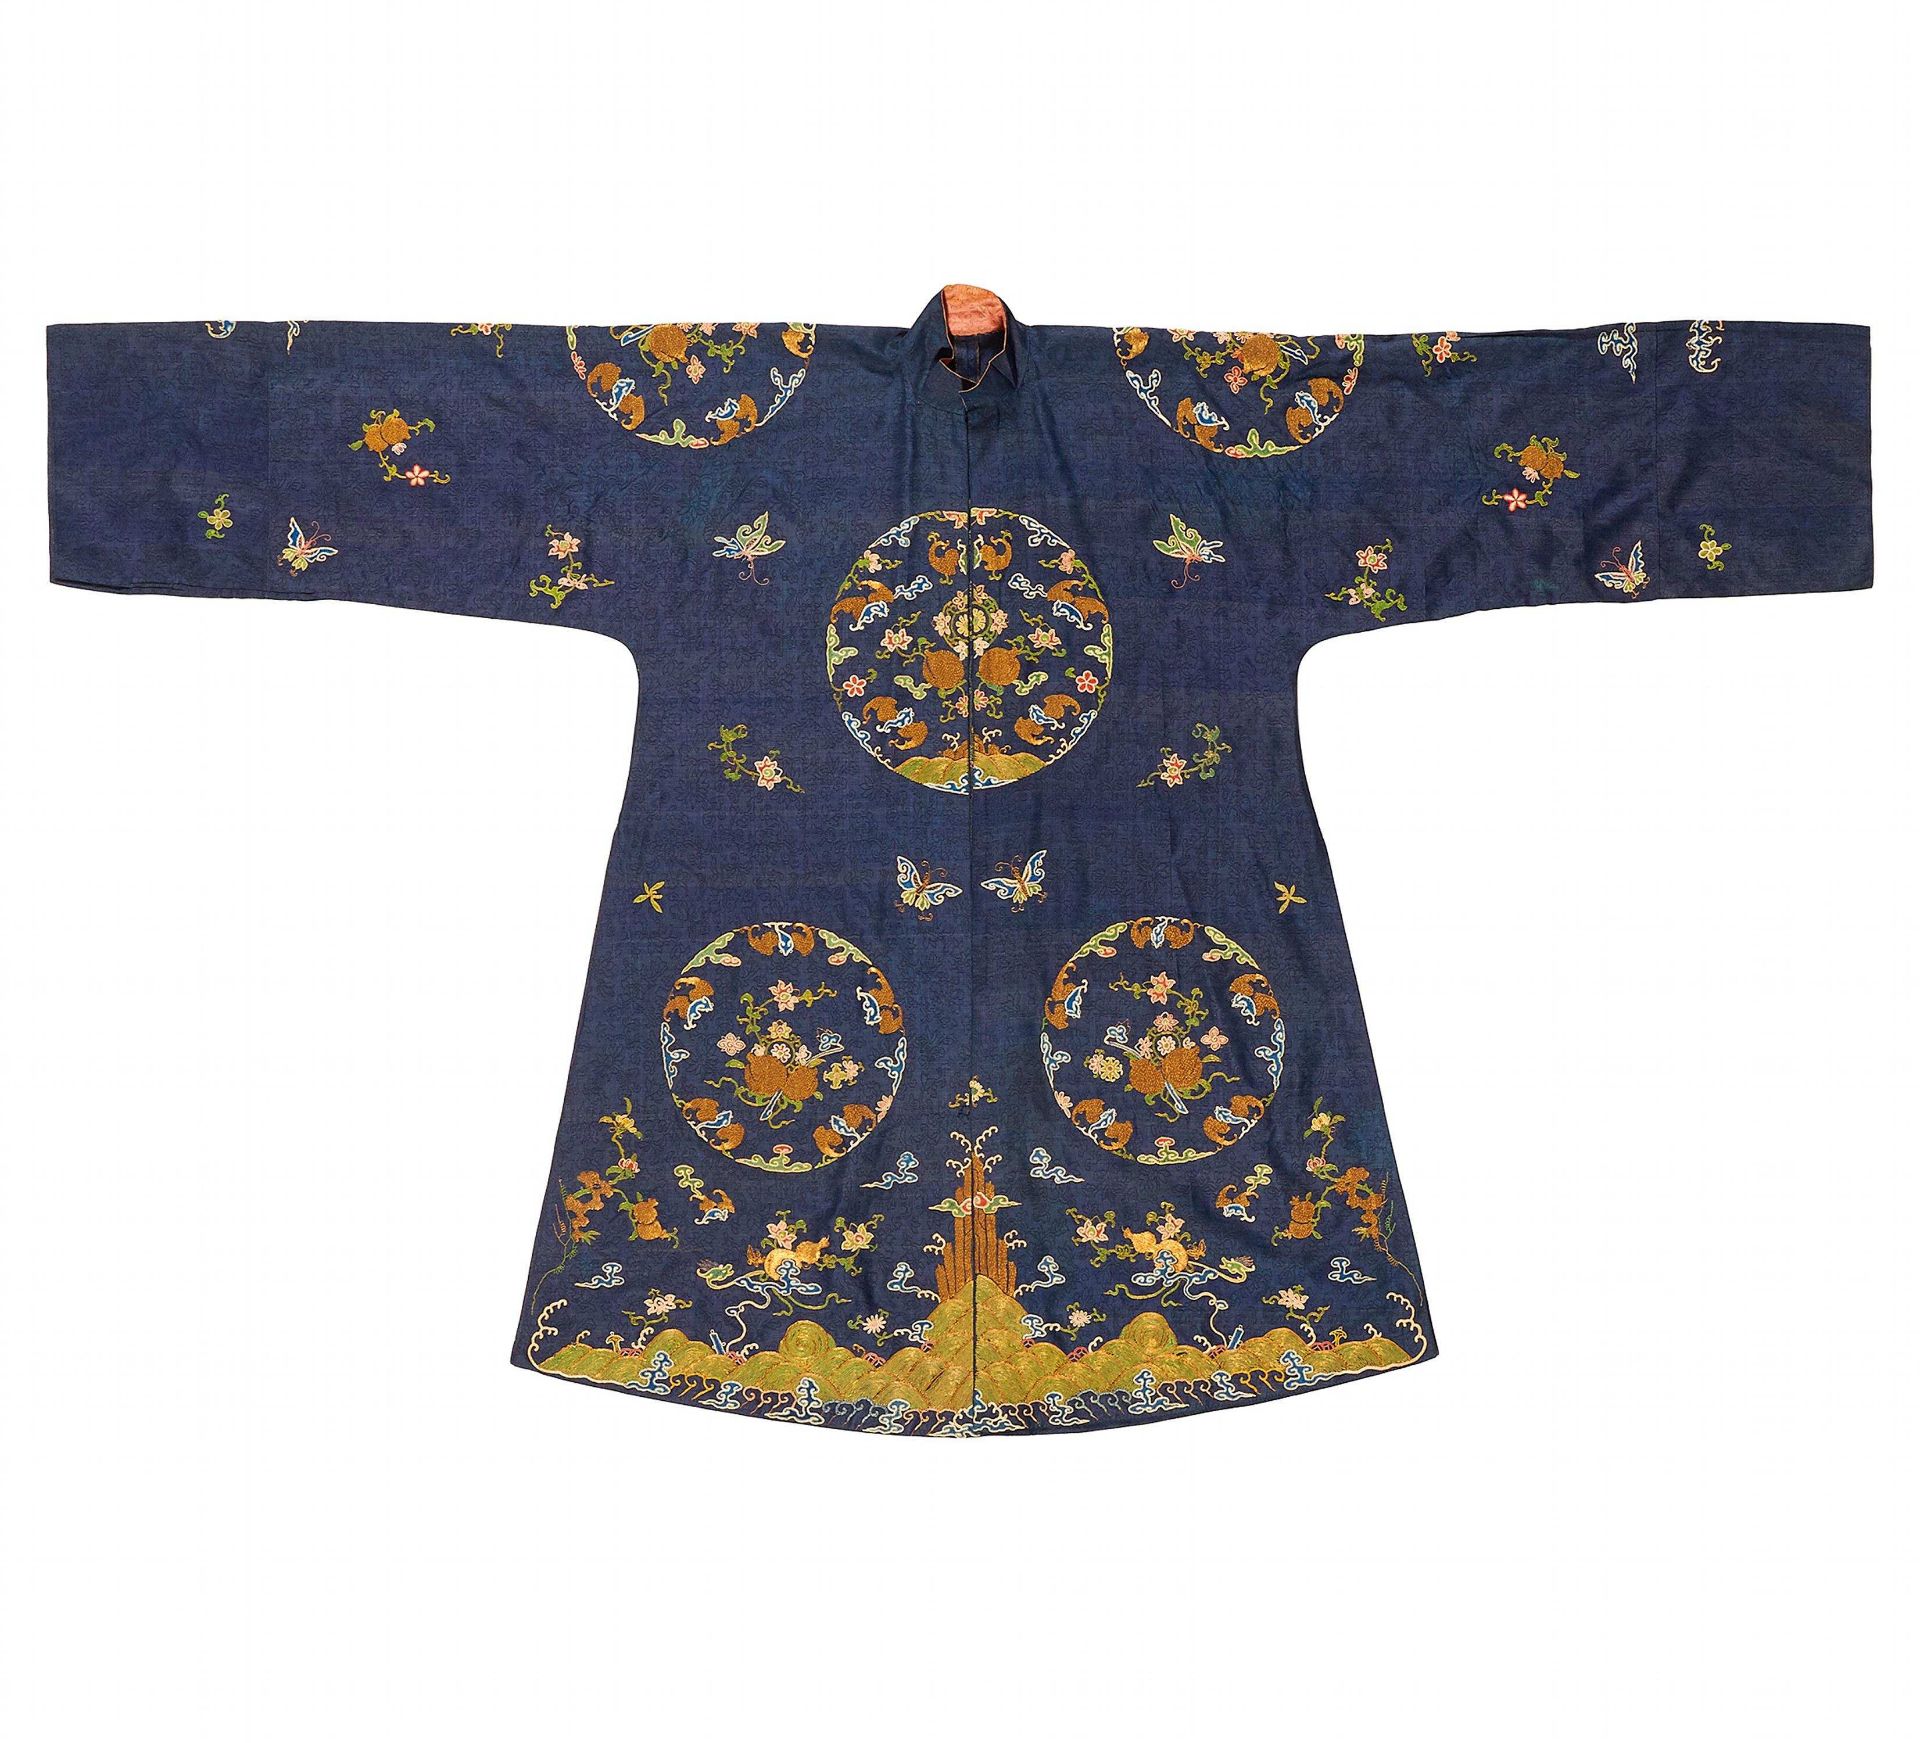 QUASI-FORMAL SUMMER GARMENT. China. About 1900. Navy blue gauze in twisted warps. Embroidered with